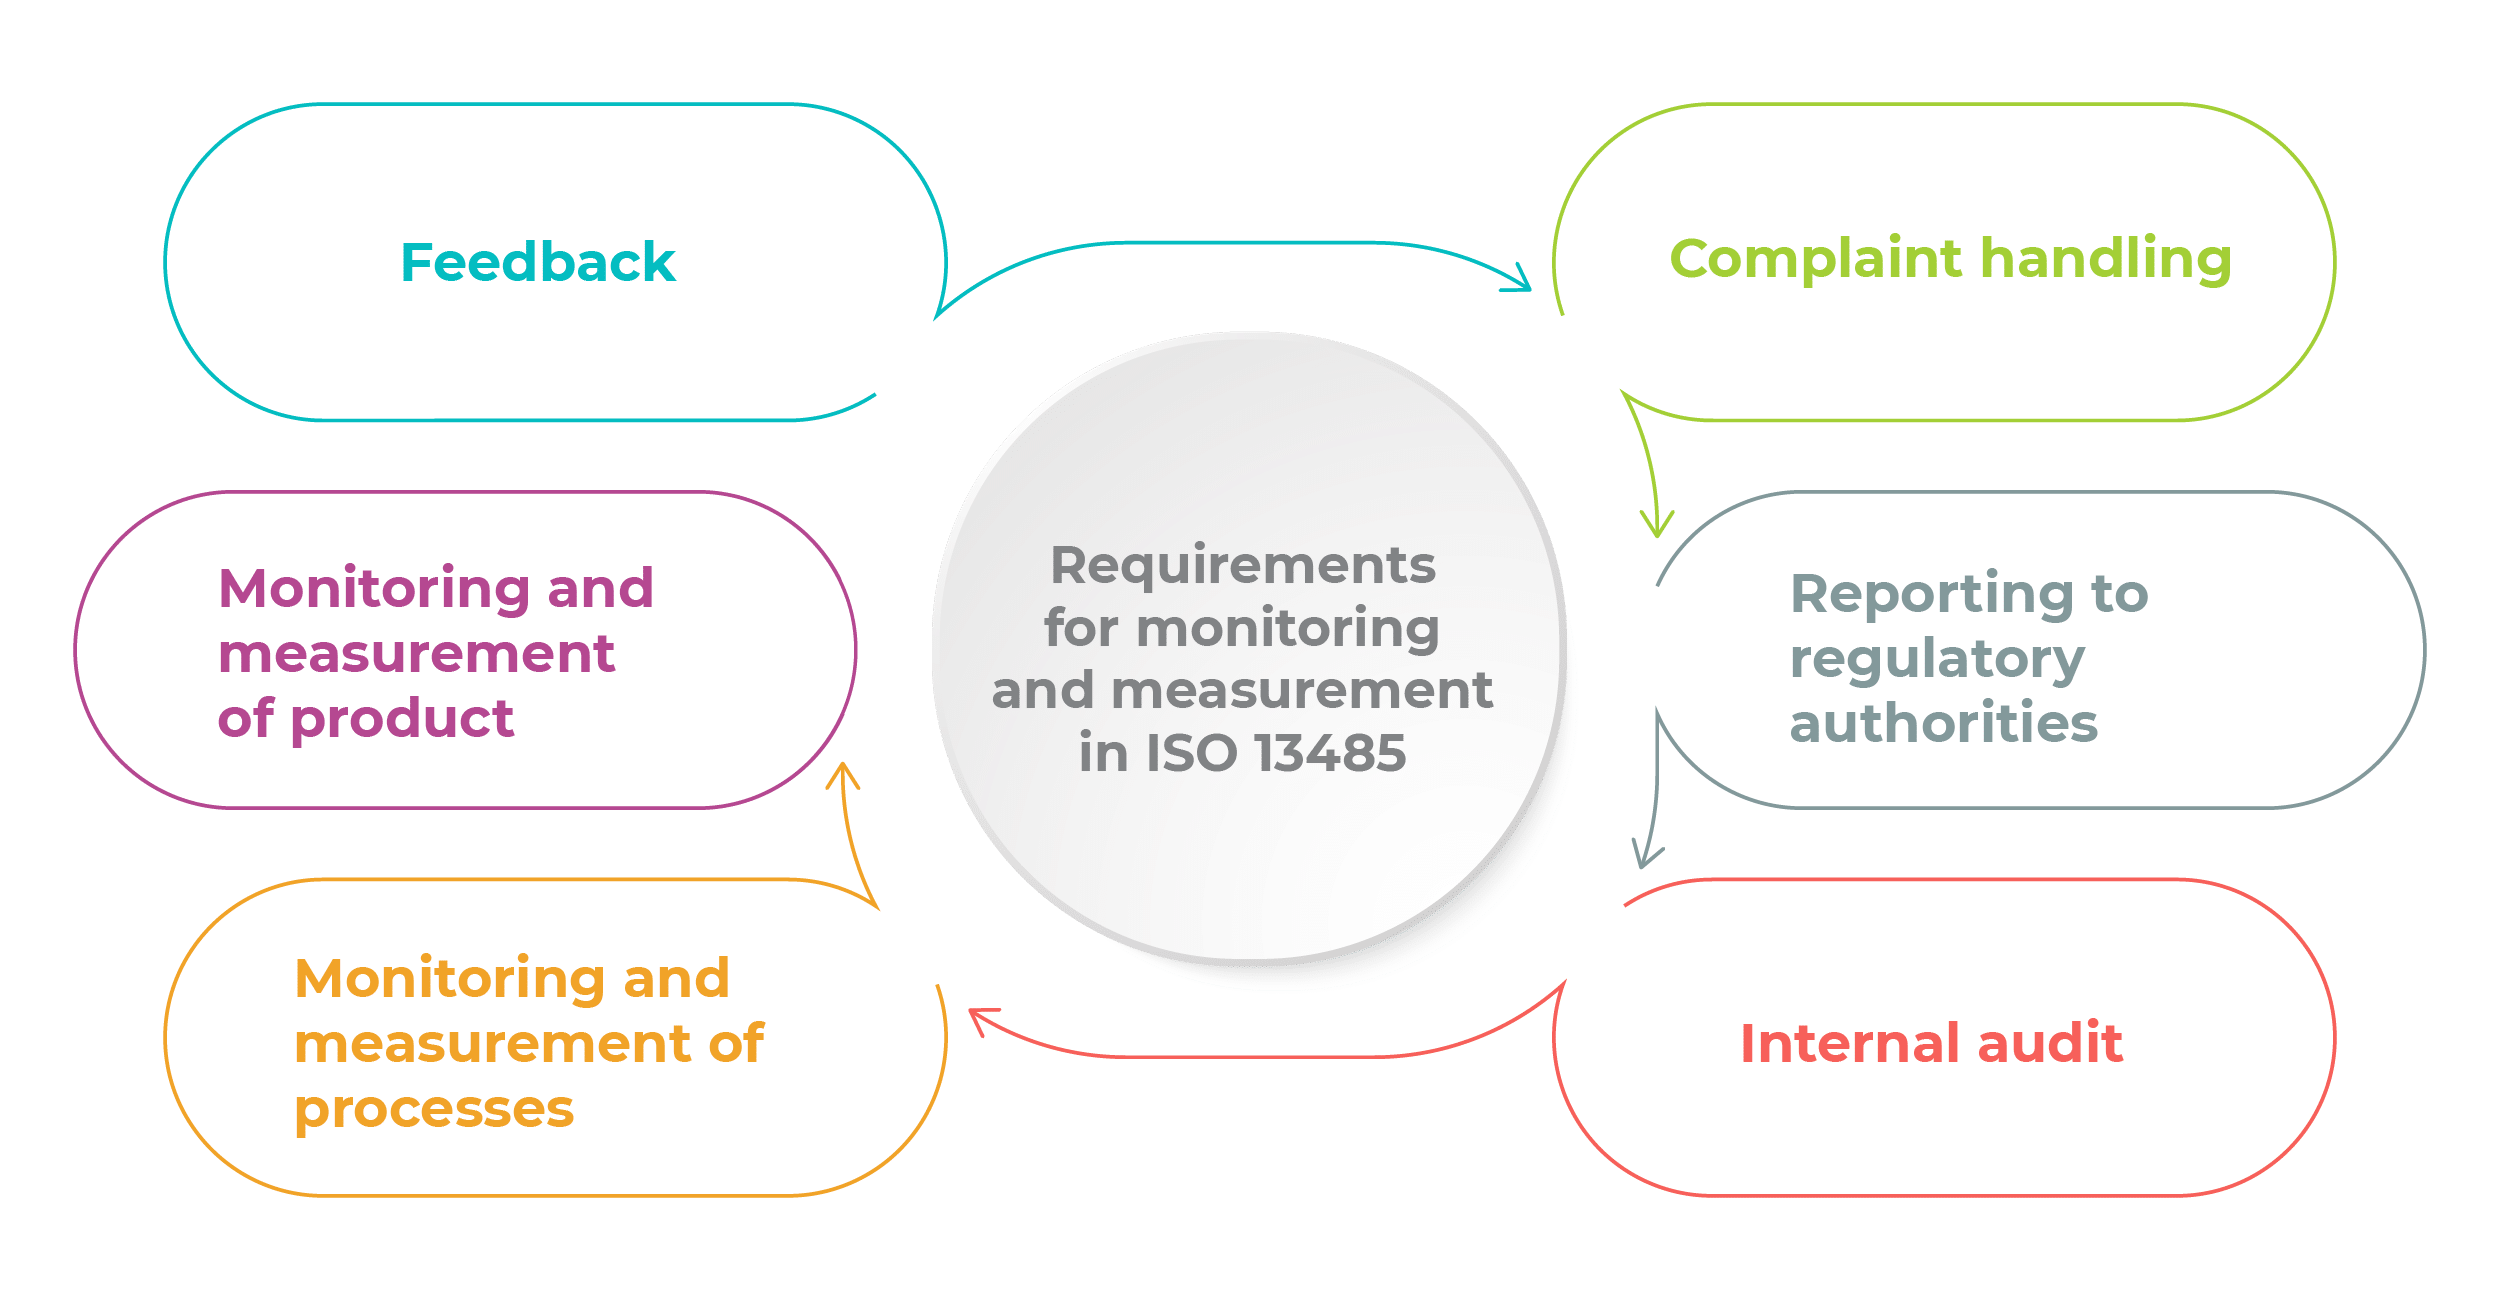 Requirements for monitoring and measurement in ISO 13485